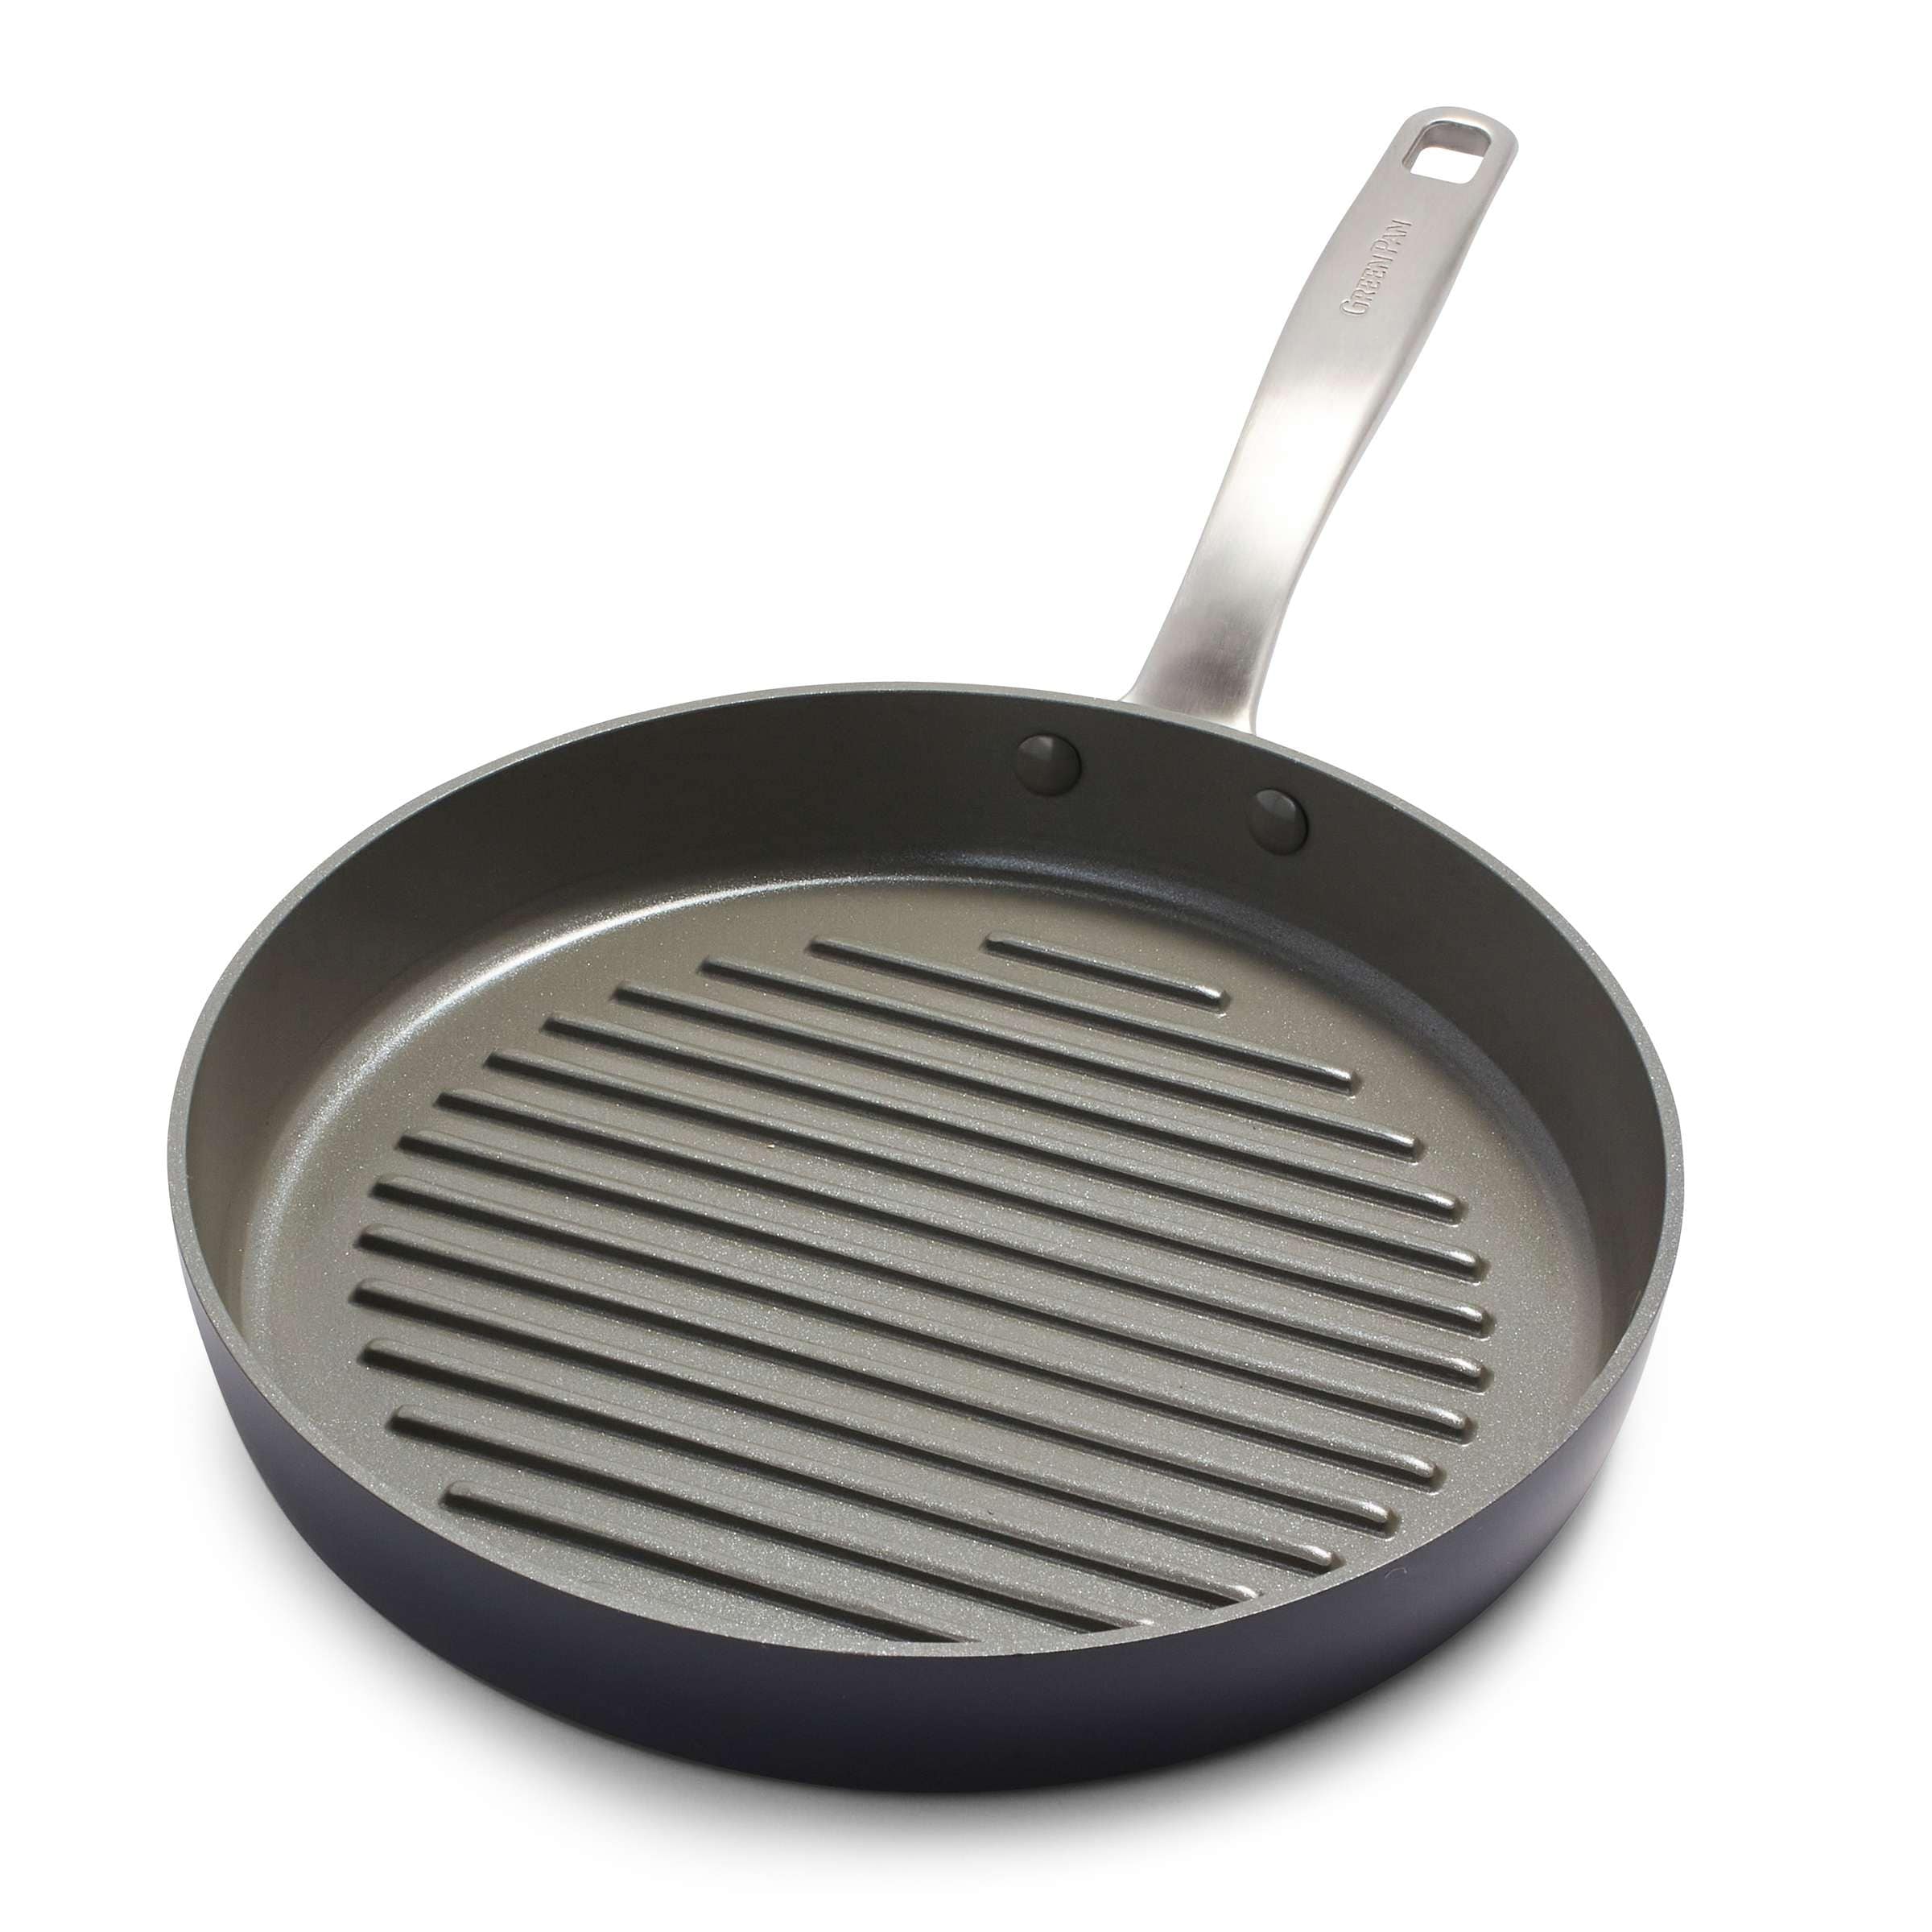 https://ak1.ostkcdn.com/images/products/is/images/direct/3cf7bb00047aa477cdfef08d4d2eb560cf8c9ec0/GreenPan-Chatham-Ceramic-Non-Stick-Round-Grill-Pan%2C-11-Inch.jpg